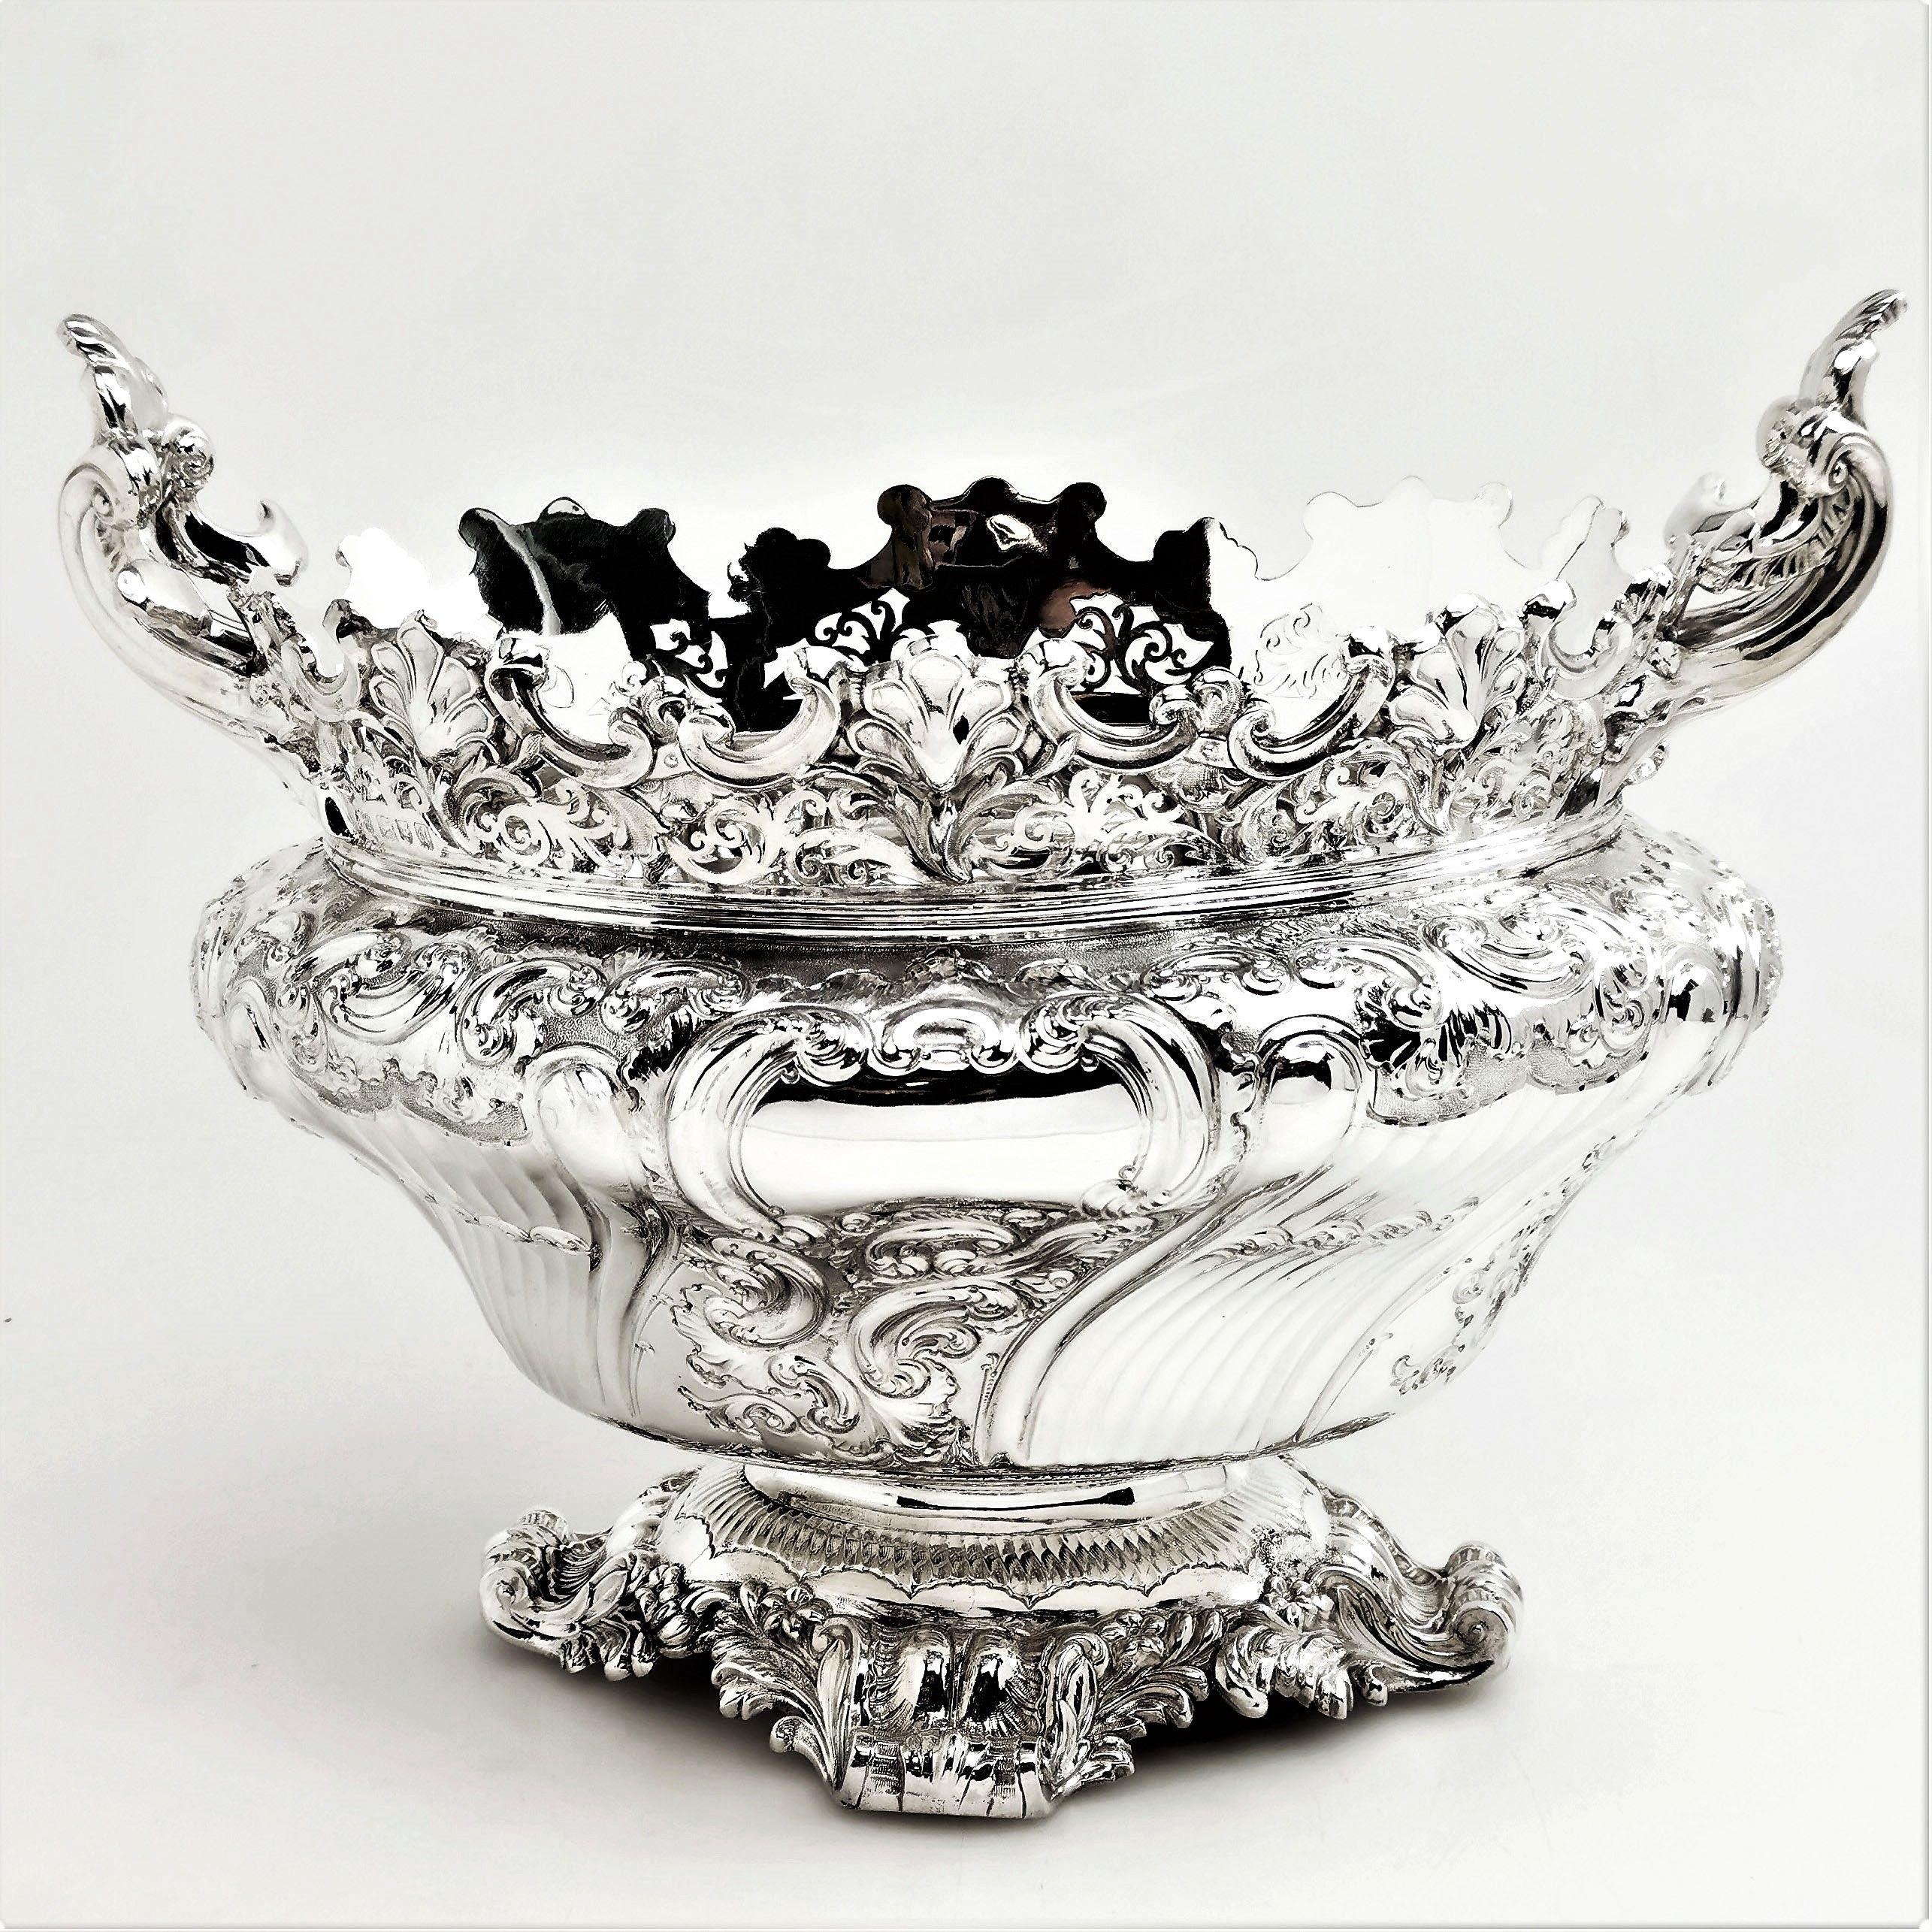 English Antique Victorian Sterling Silver Bowl / Dish / Centrepiece, 1899